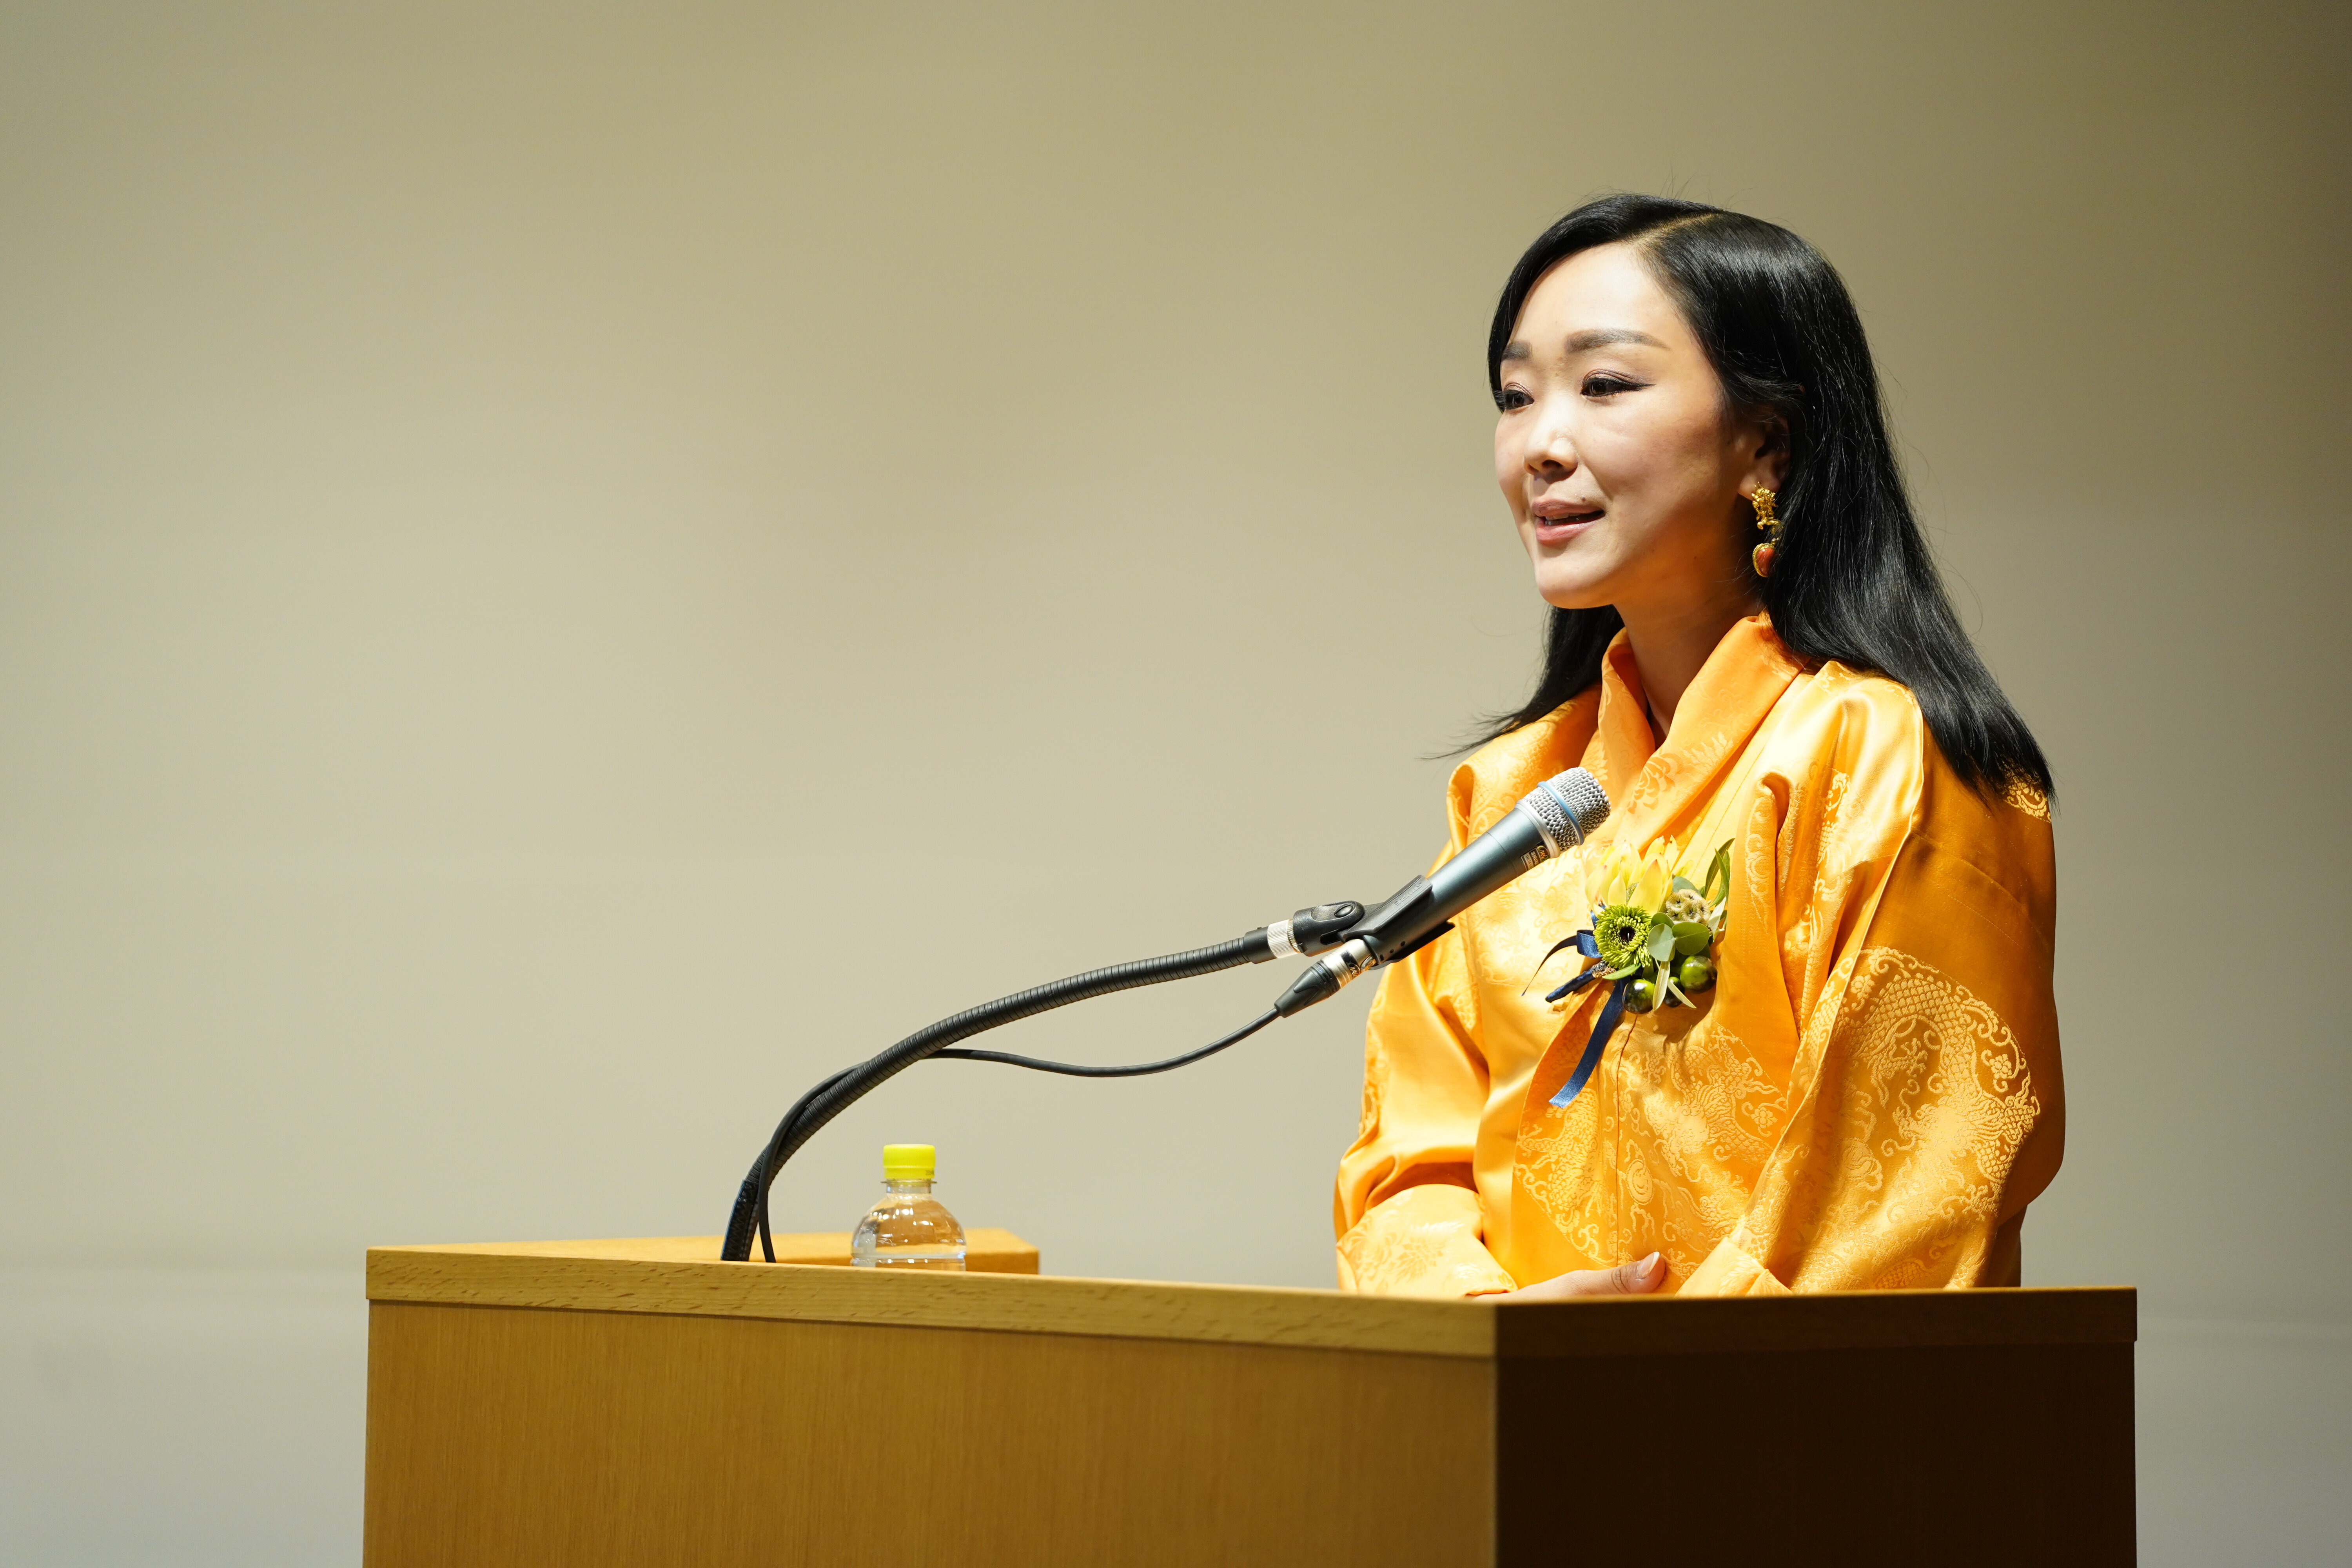 Her Royal Highness Princess Sonam Dechan Wangchuck giving a lecture as a Royal Representative of the Fourth King of Bhutan at the 2022 Blue Planet Prize Commemorative Lecture
